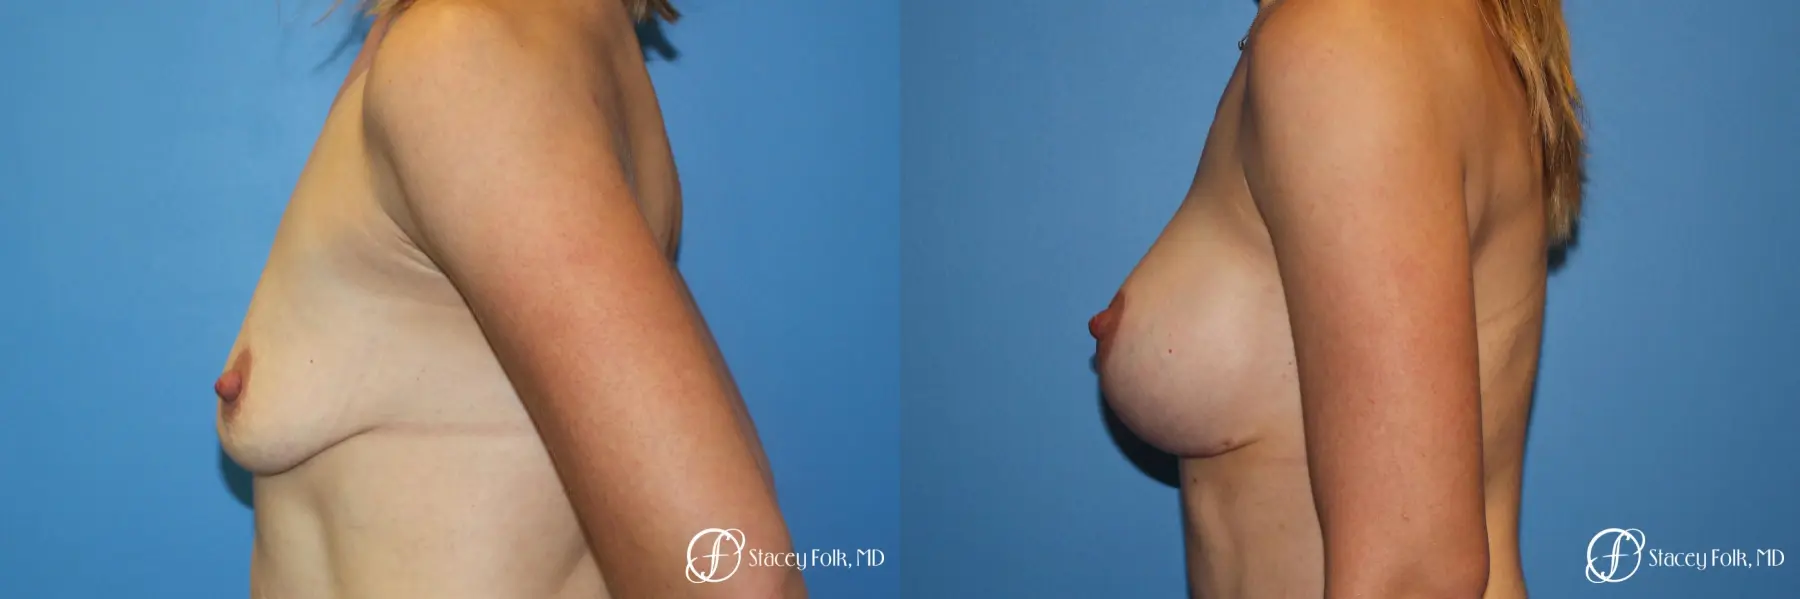 Breast Augmentation and Breast lift (Mastopexy) - Before and After 2